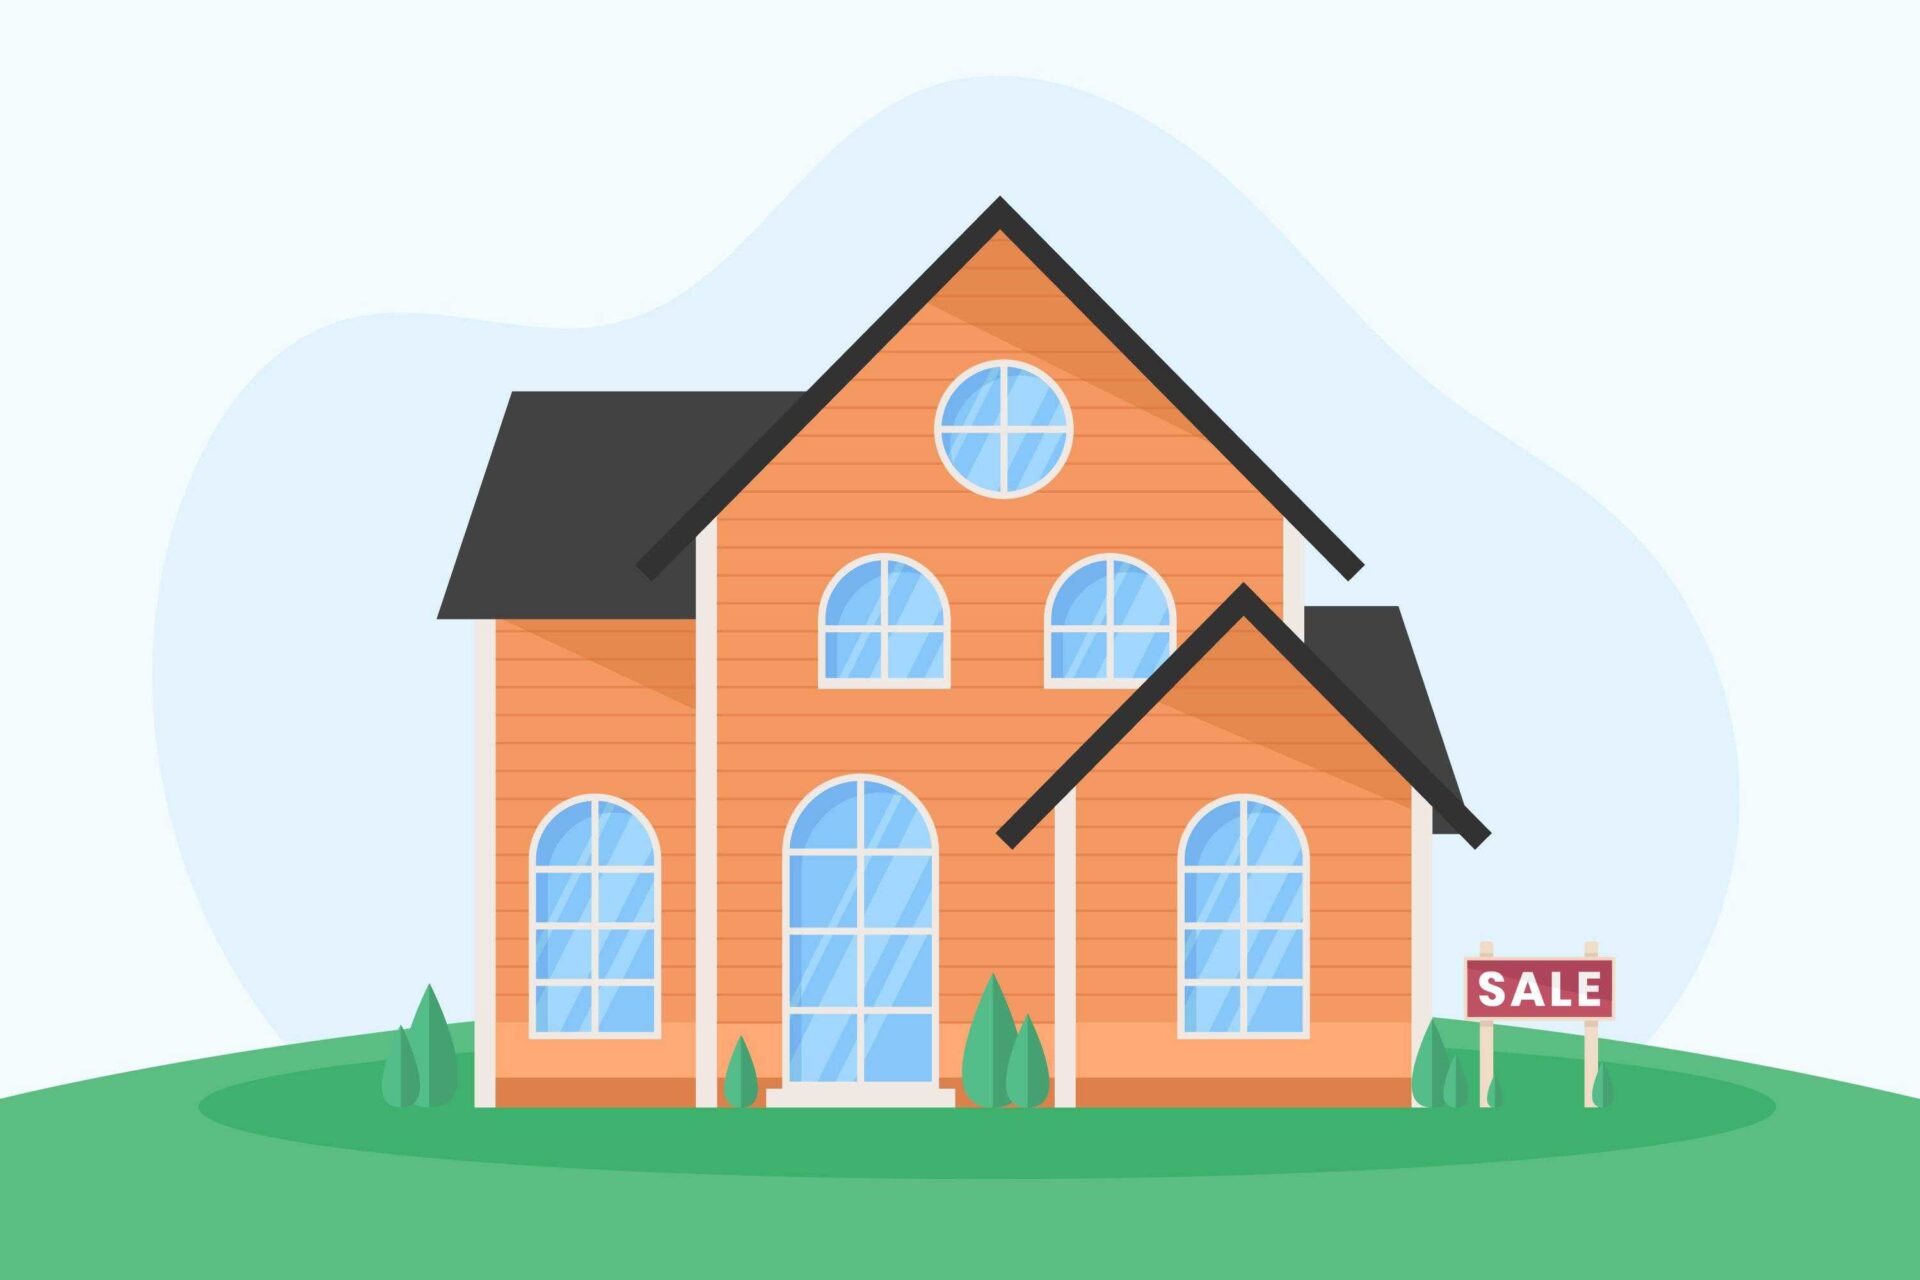 Things to Keep in Mind When Selling Your House